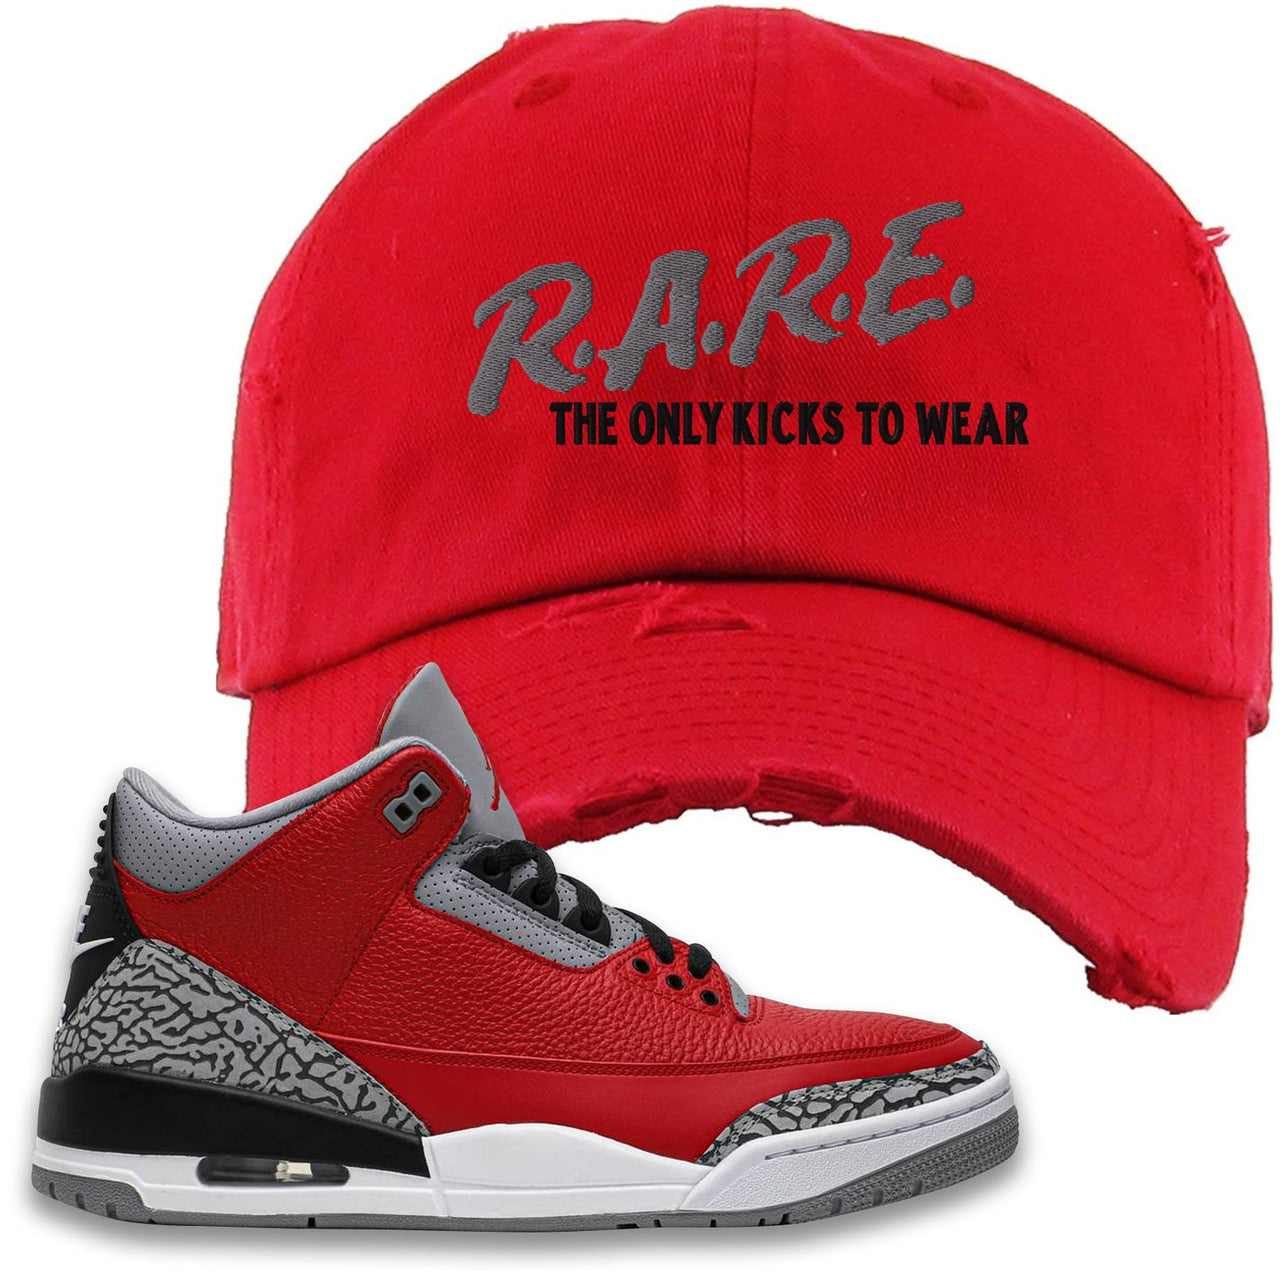 Chicago Exclusive Jordan 3 Red Cement Sneaker Red Distressed Dad Hat | Hat to match Jordan 3 All Star Red Cement Shoes | Rare